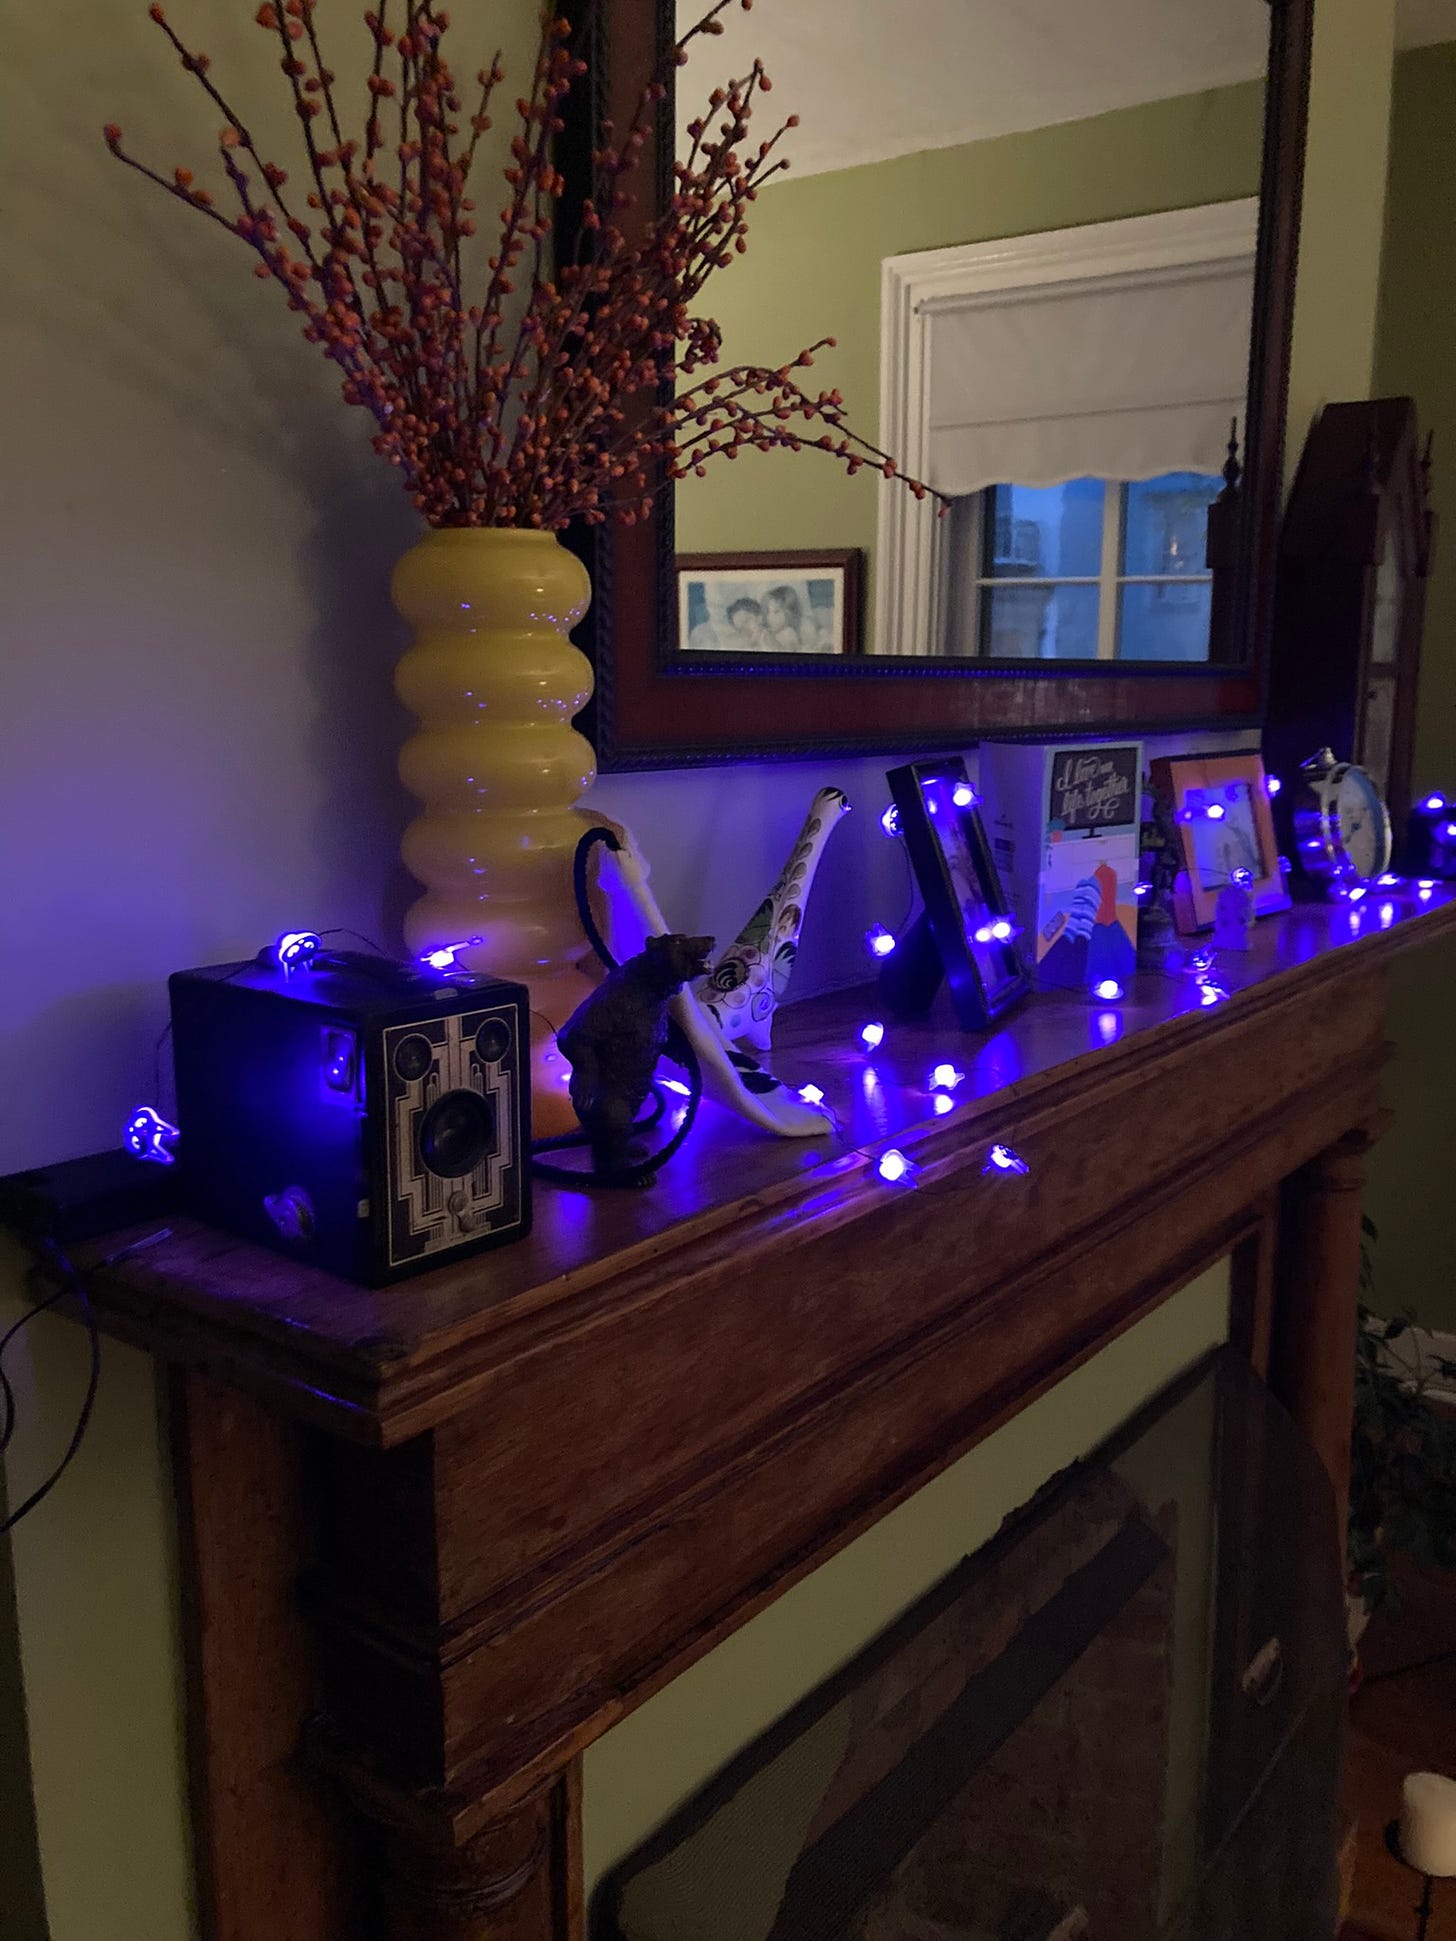 Image of Robyn's mantel with purple Halloween cat lights draped across it.